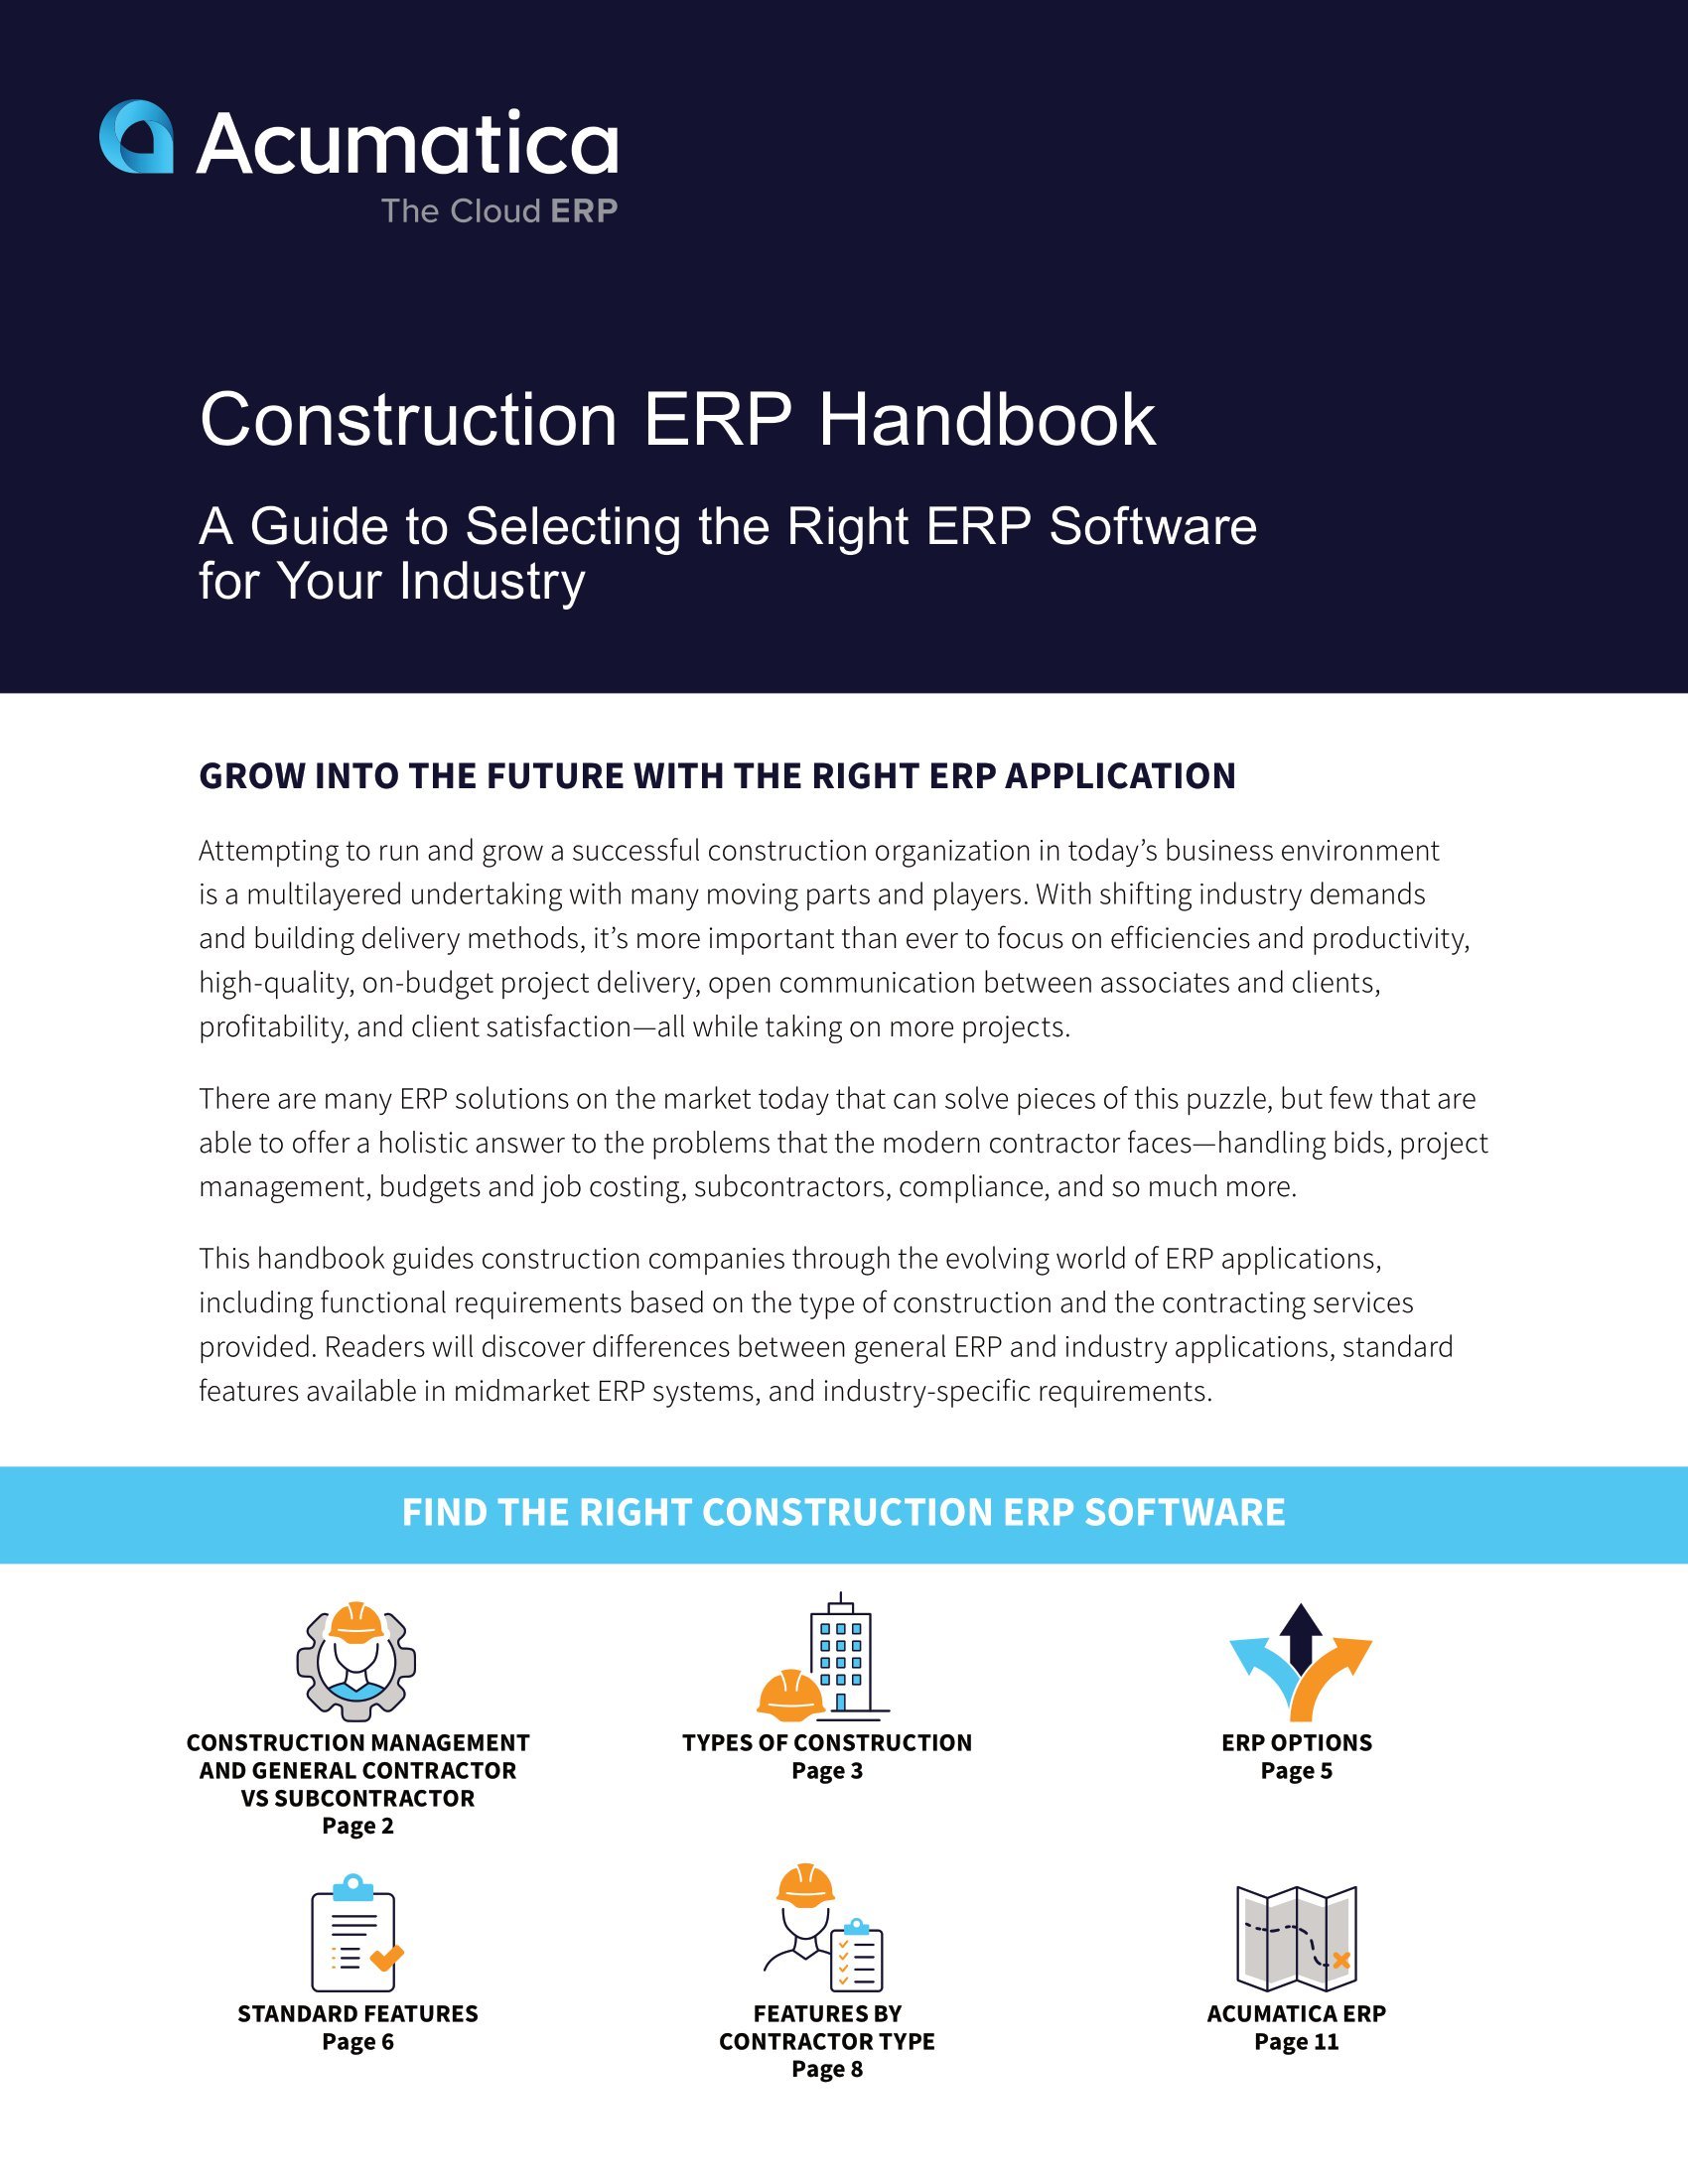 The Definitive Handbook on Selecting the Right Construction ERP Software